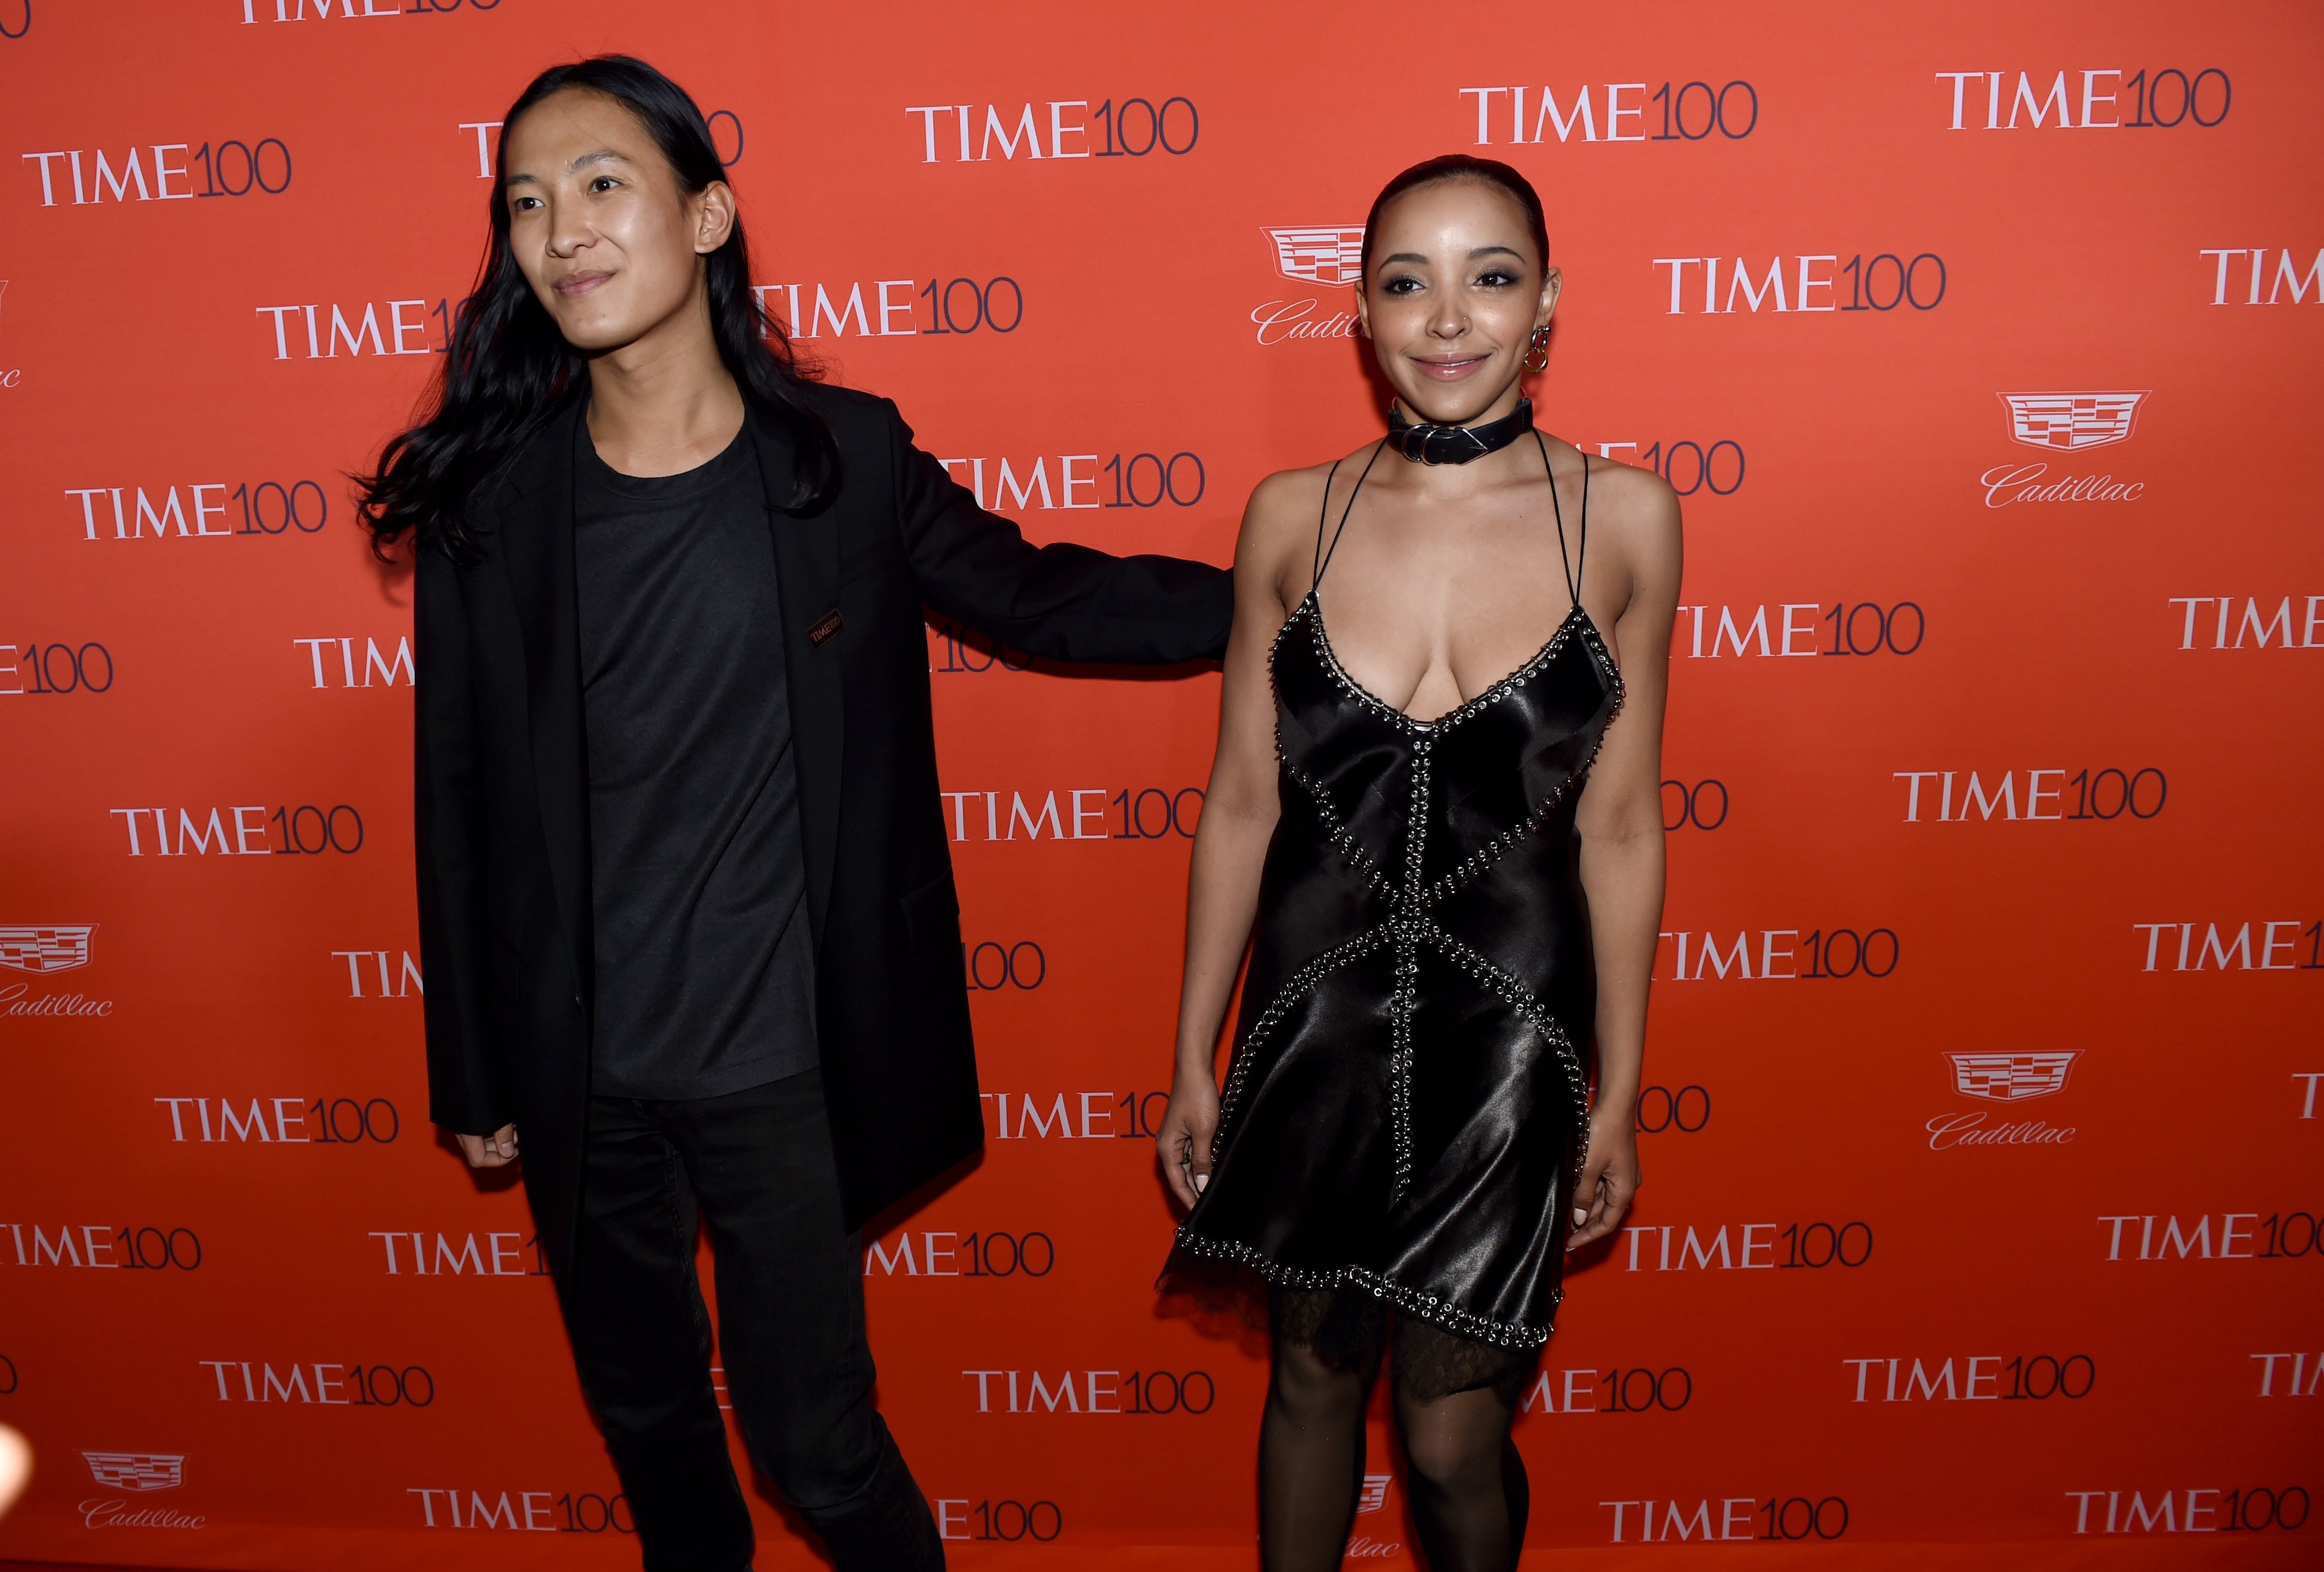 Alexander Wang and Tinashe at the TIME 100 gala in New York on April 26, 2016.